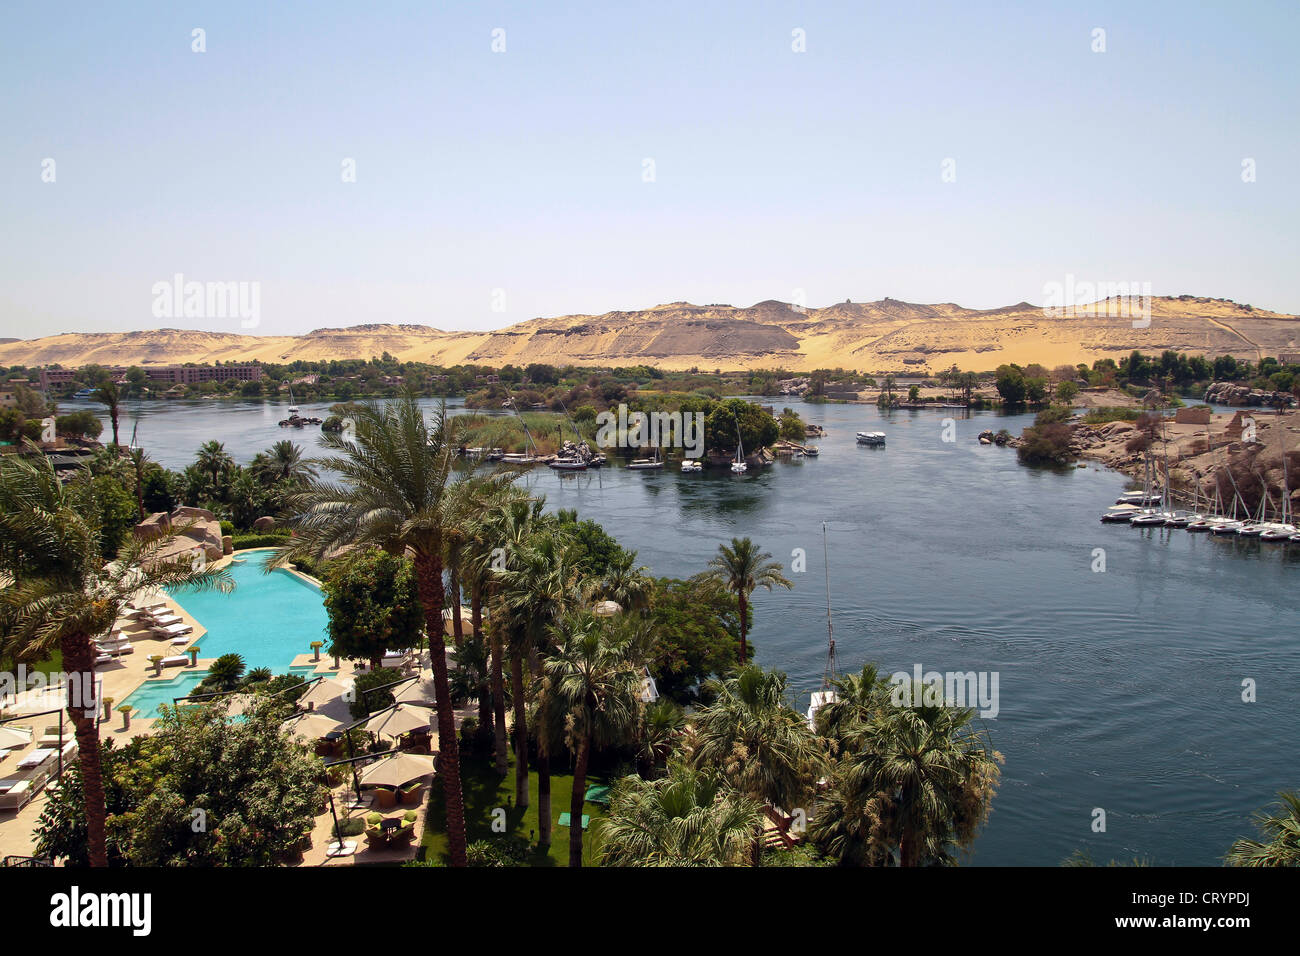 View of the River Nile from the Old Cataract Hotel in Aswan Egypt Stock Photo